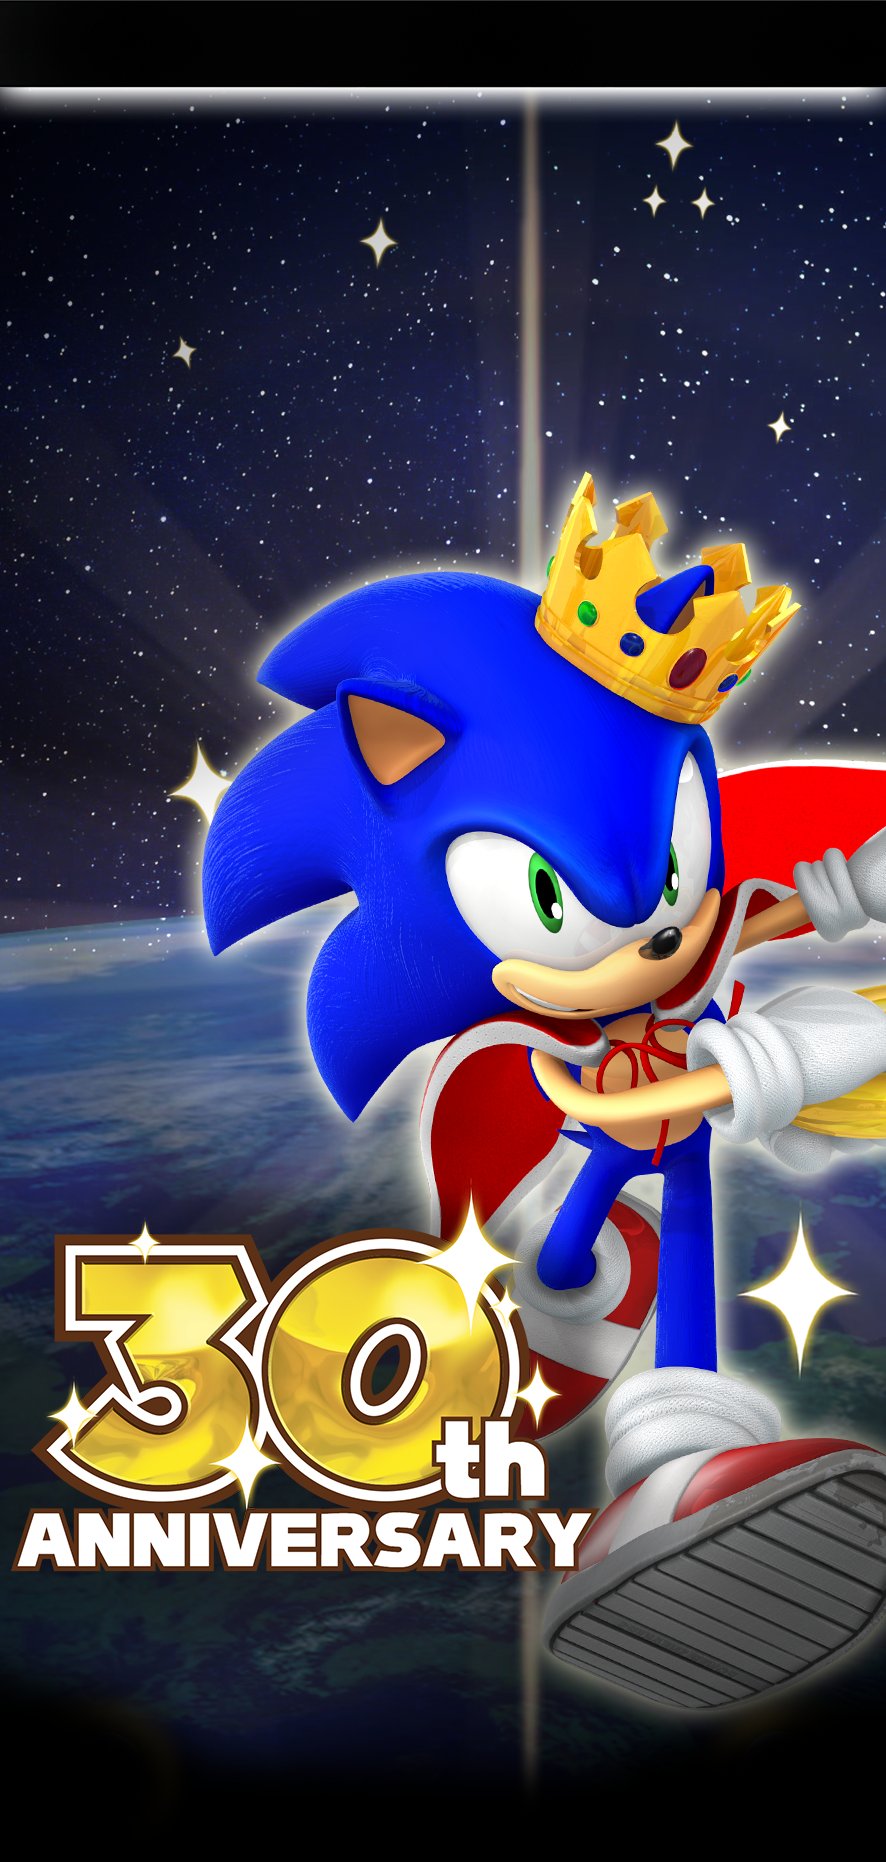 Nibroc.Rock ar Twitter: Happy 30th Anniversary, Sonic The Hedgehog! As tradition I've made a new Birthday King Sonic render! along with desktop and moblie wallpaper #Sonic30thAnniversary #Sonic30th